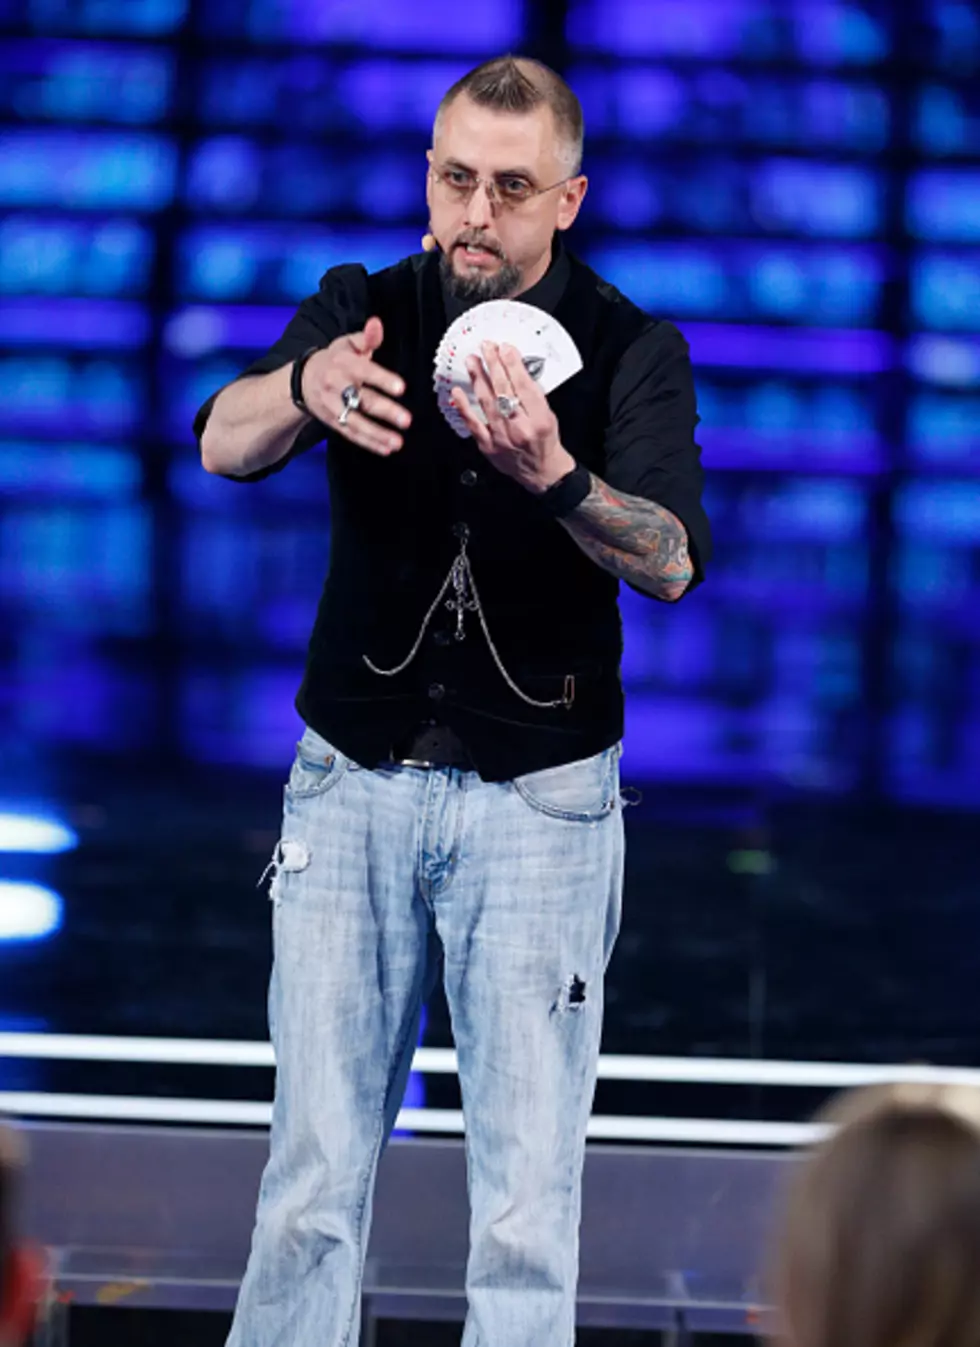 Wyoming Magician Aiden Sinclair Returns to “America’s Got Talent” (Video)